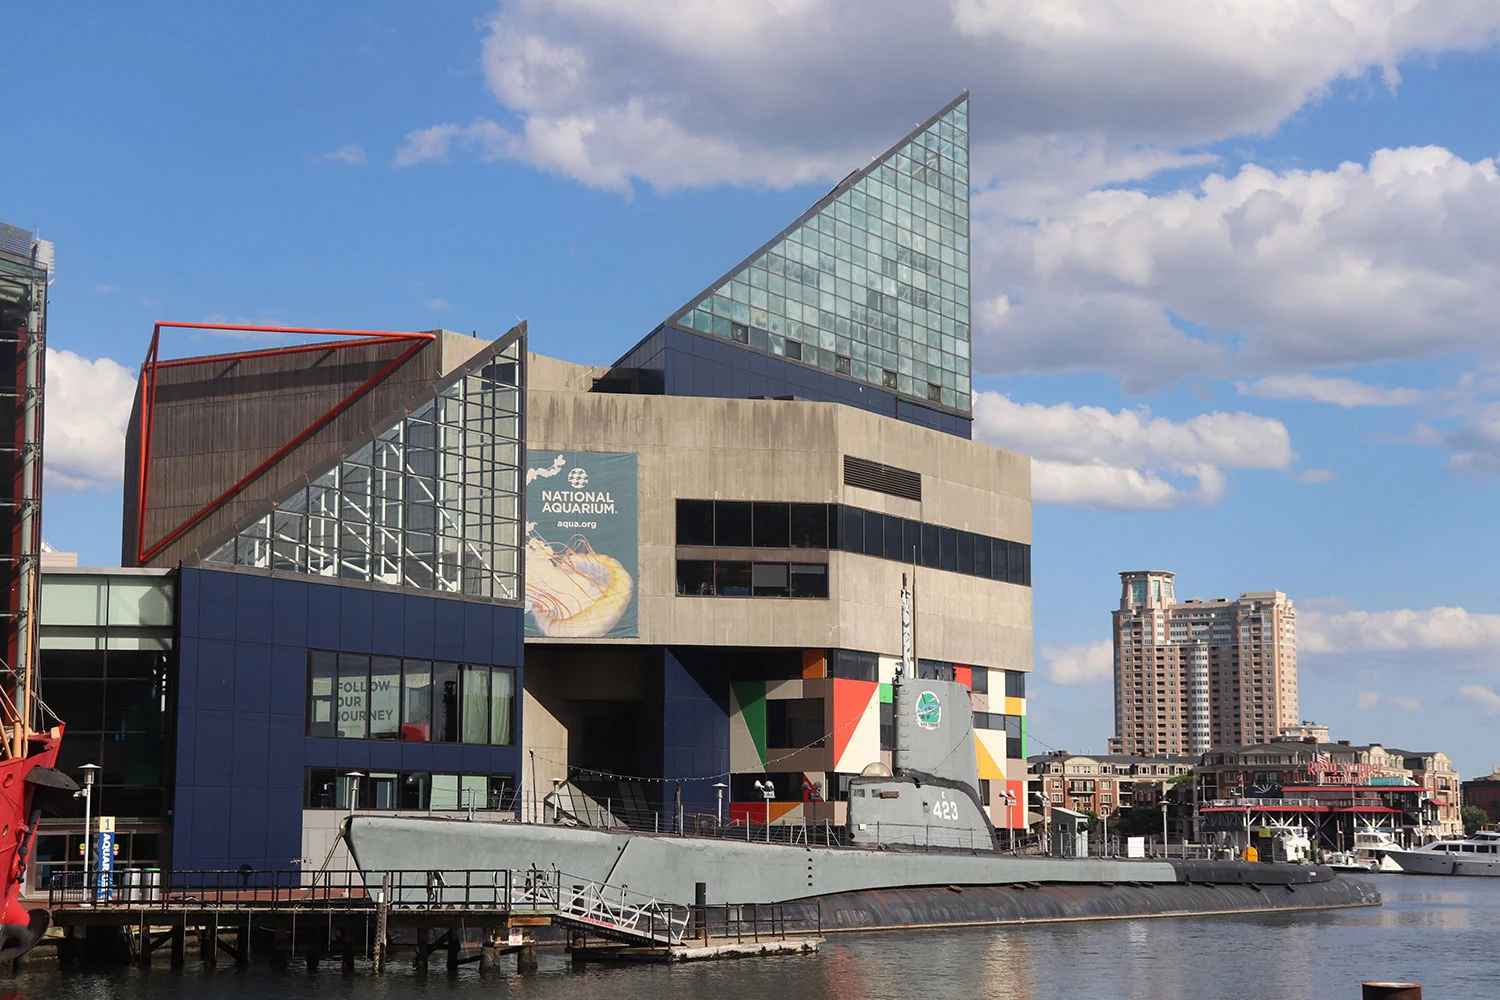 Things to Do in Baltimore: The National Aquarium